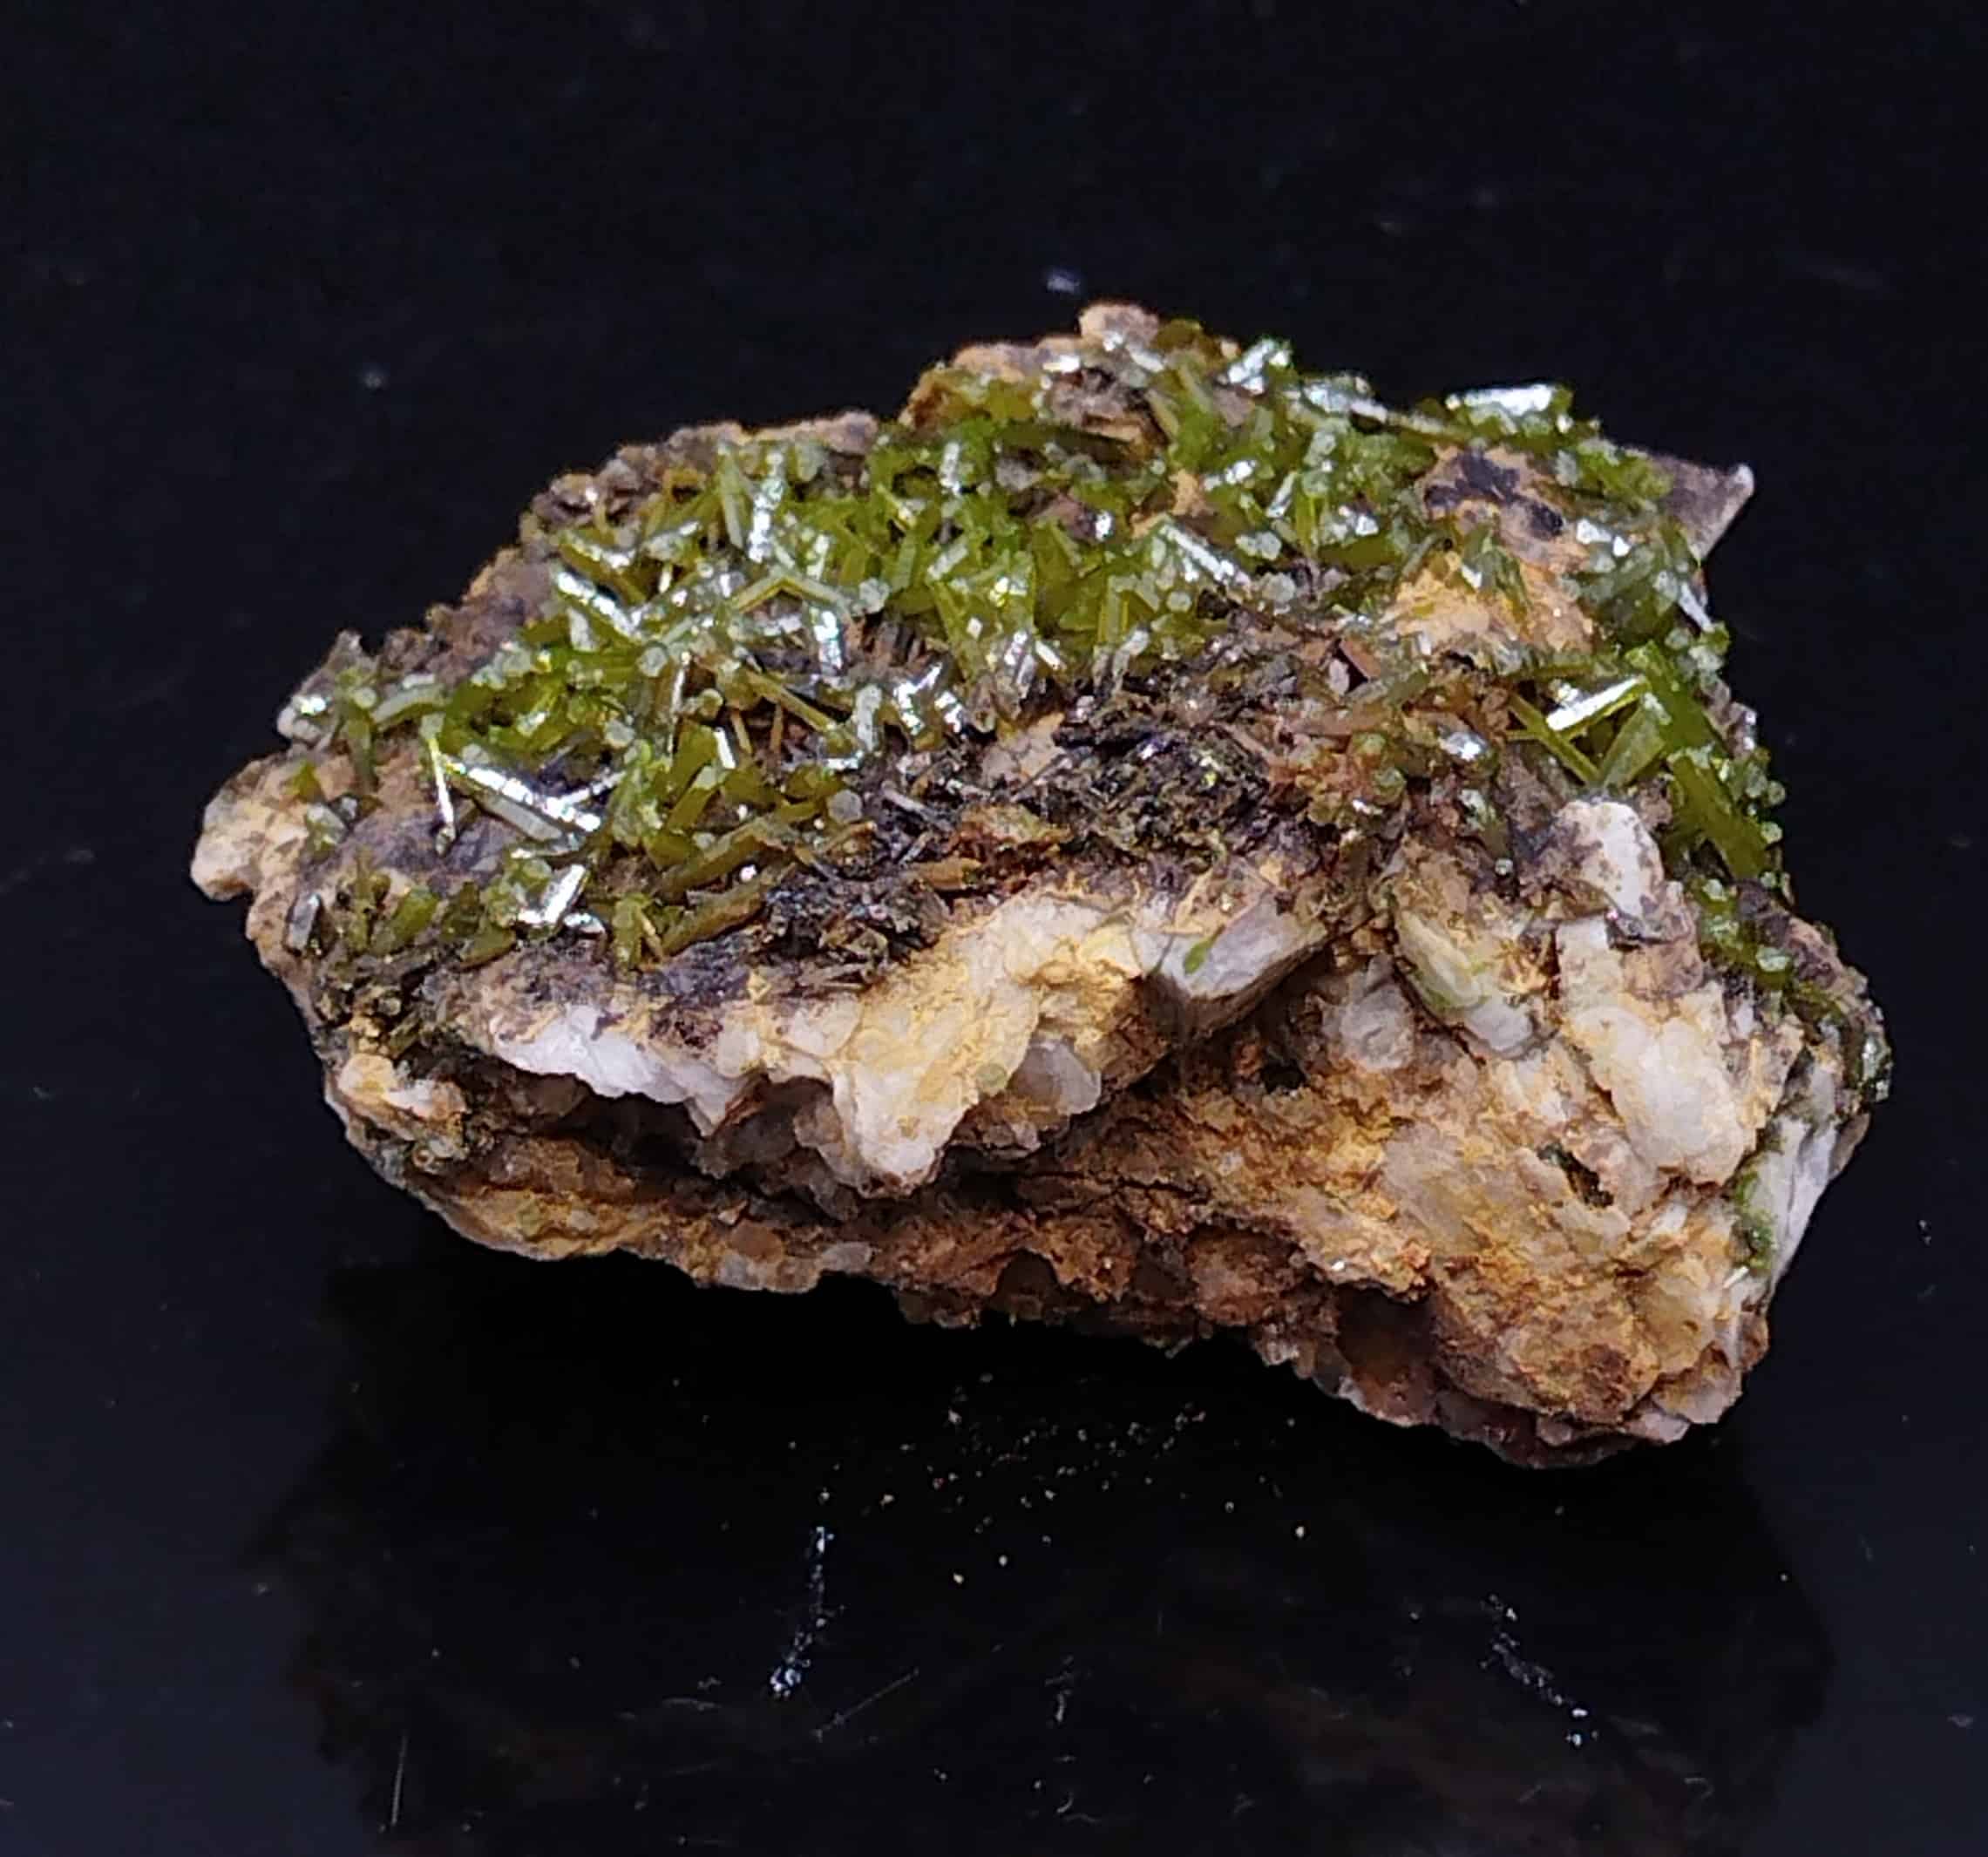 Pyromorphite, Chaillac, Indre.